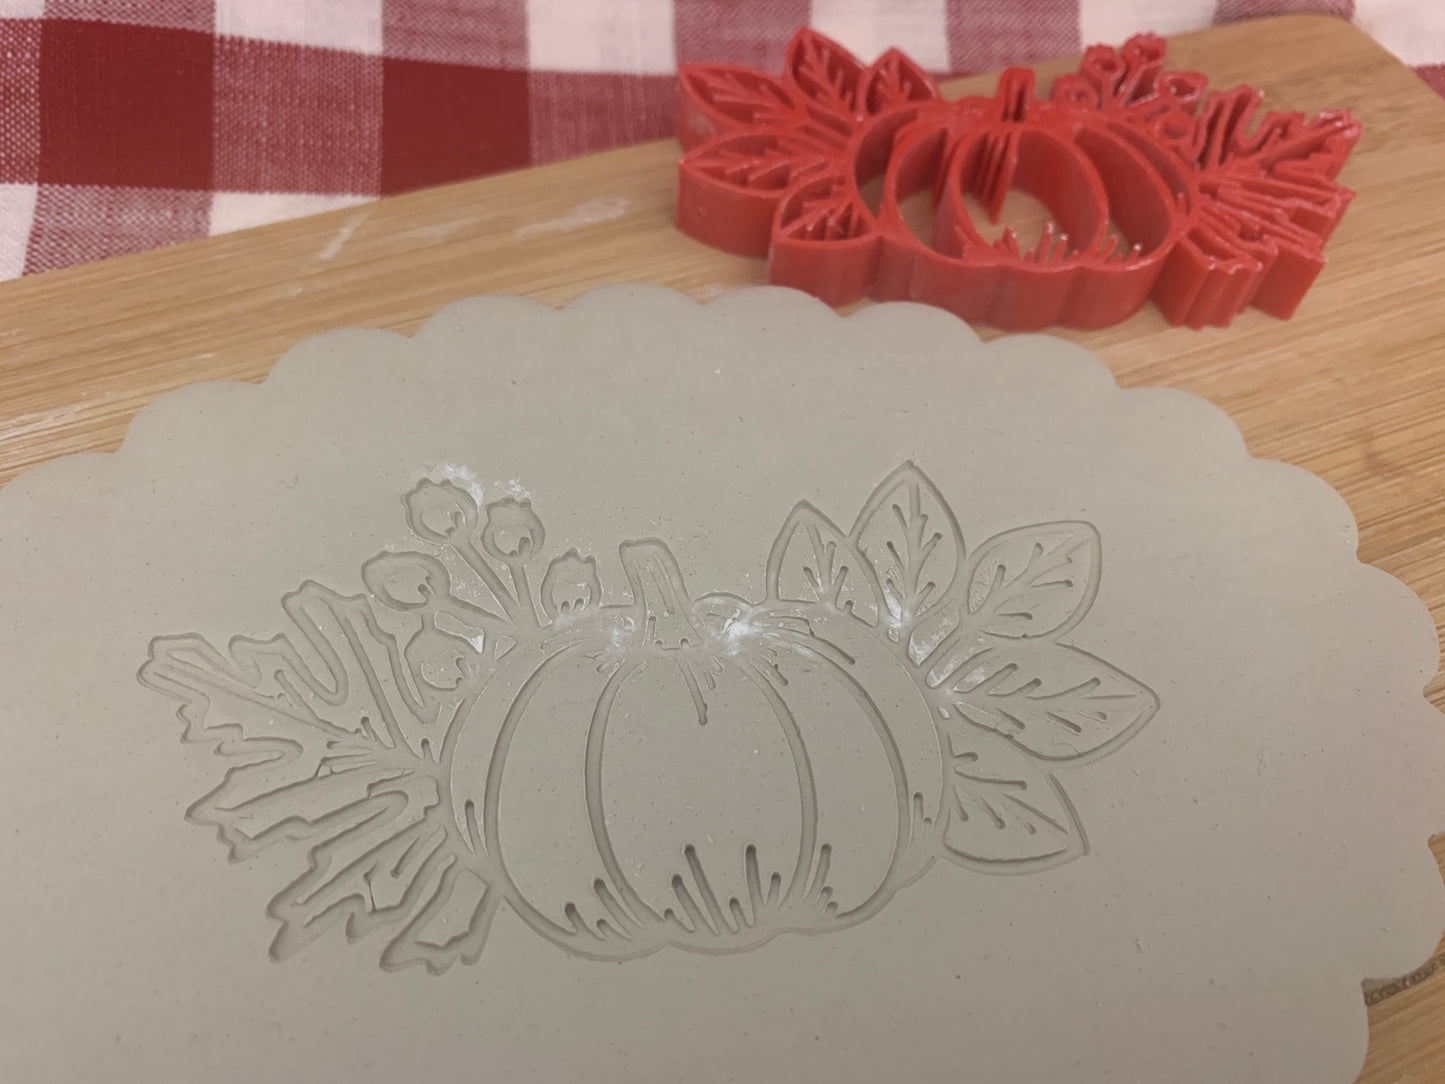 Pottery Stamp, Fall pumpkin w/ leaves design - multiple sizes